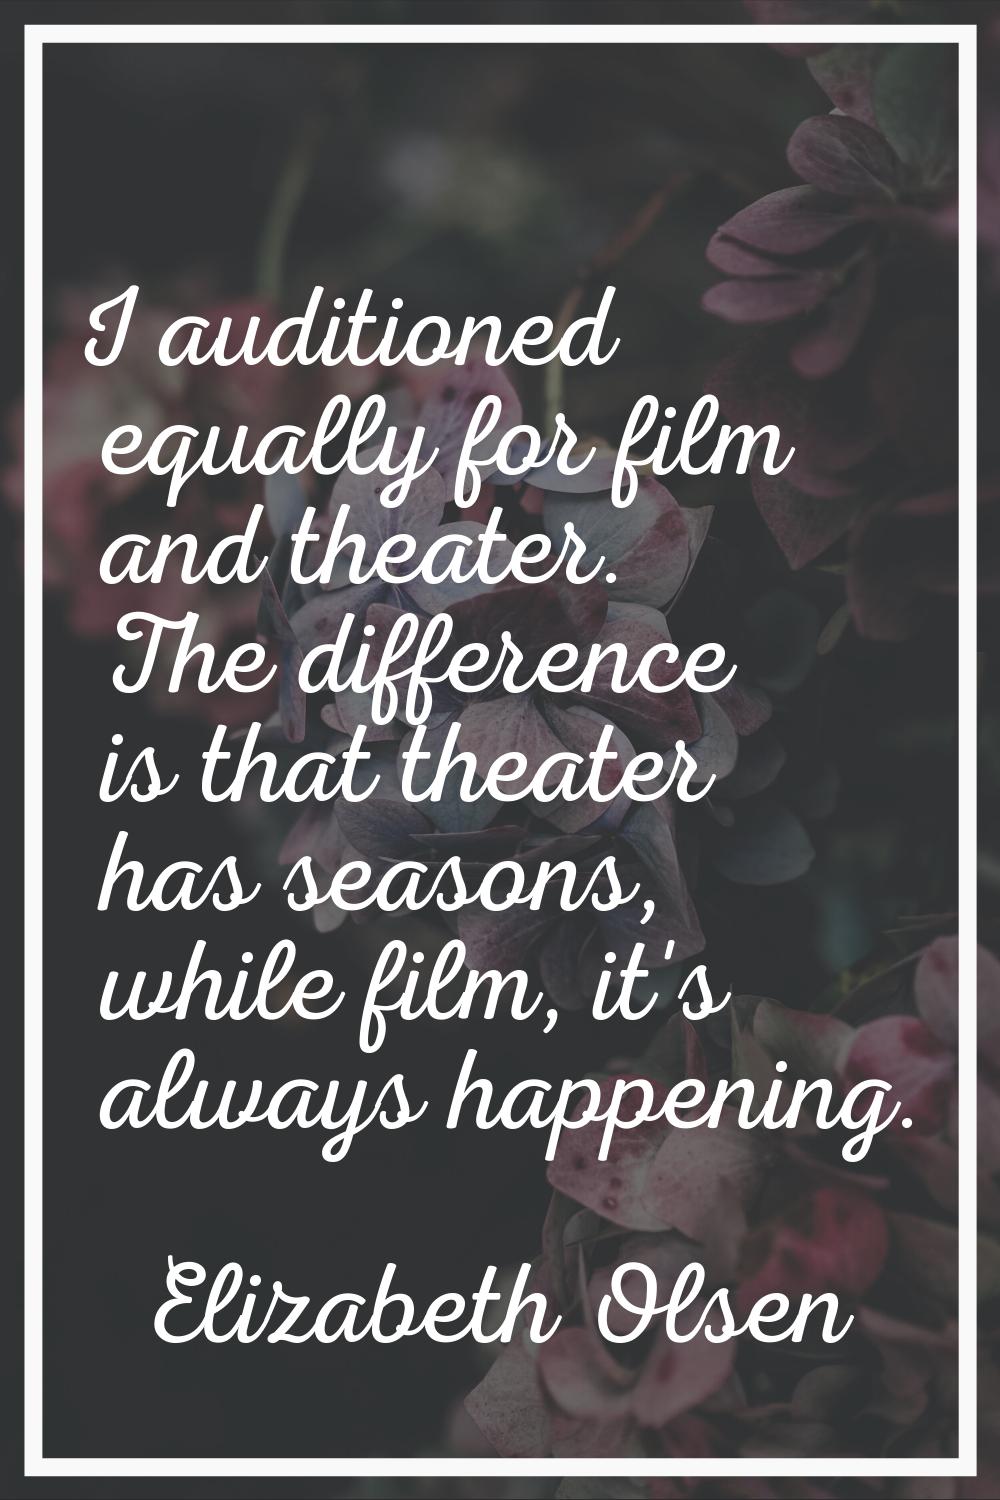 I auditioned equally for film and theater. The difference is that theater has seasons, while film, 